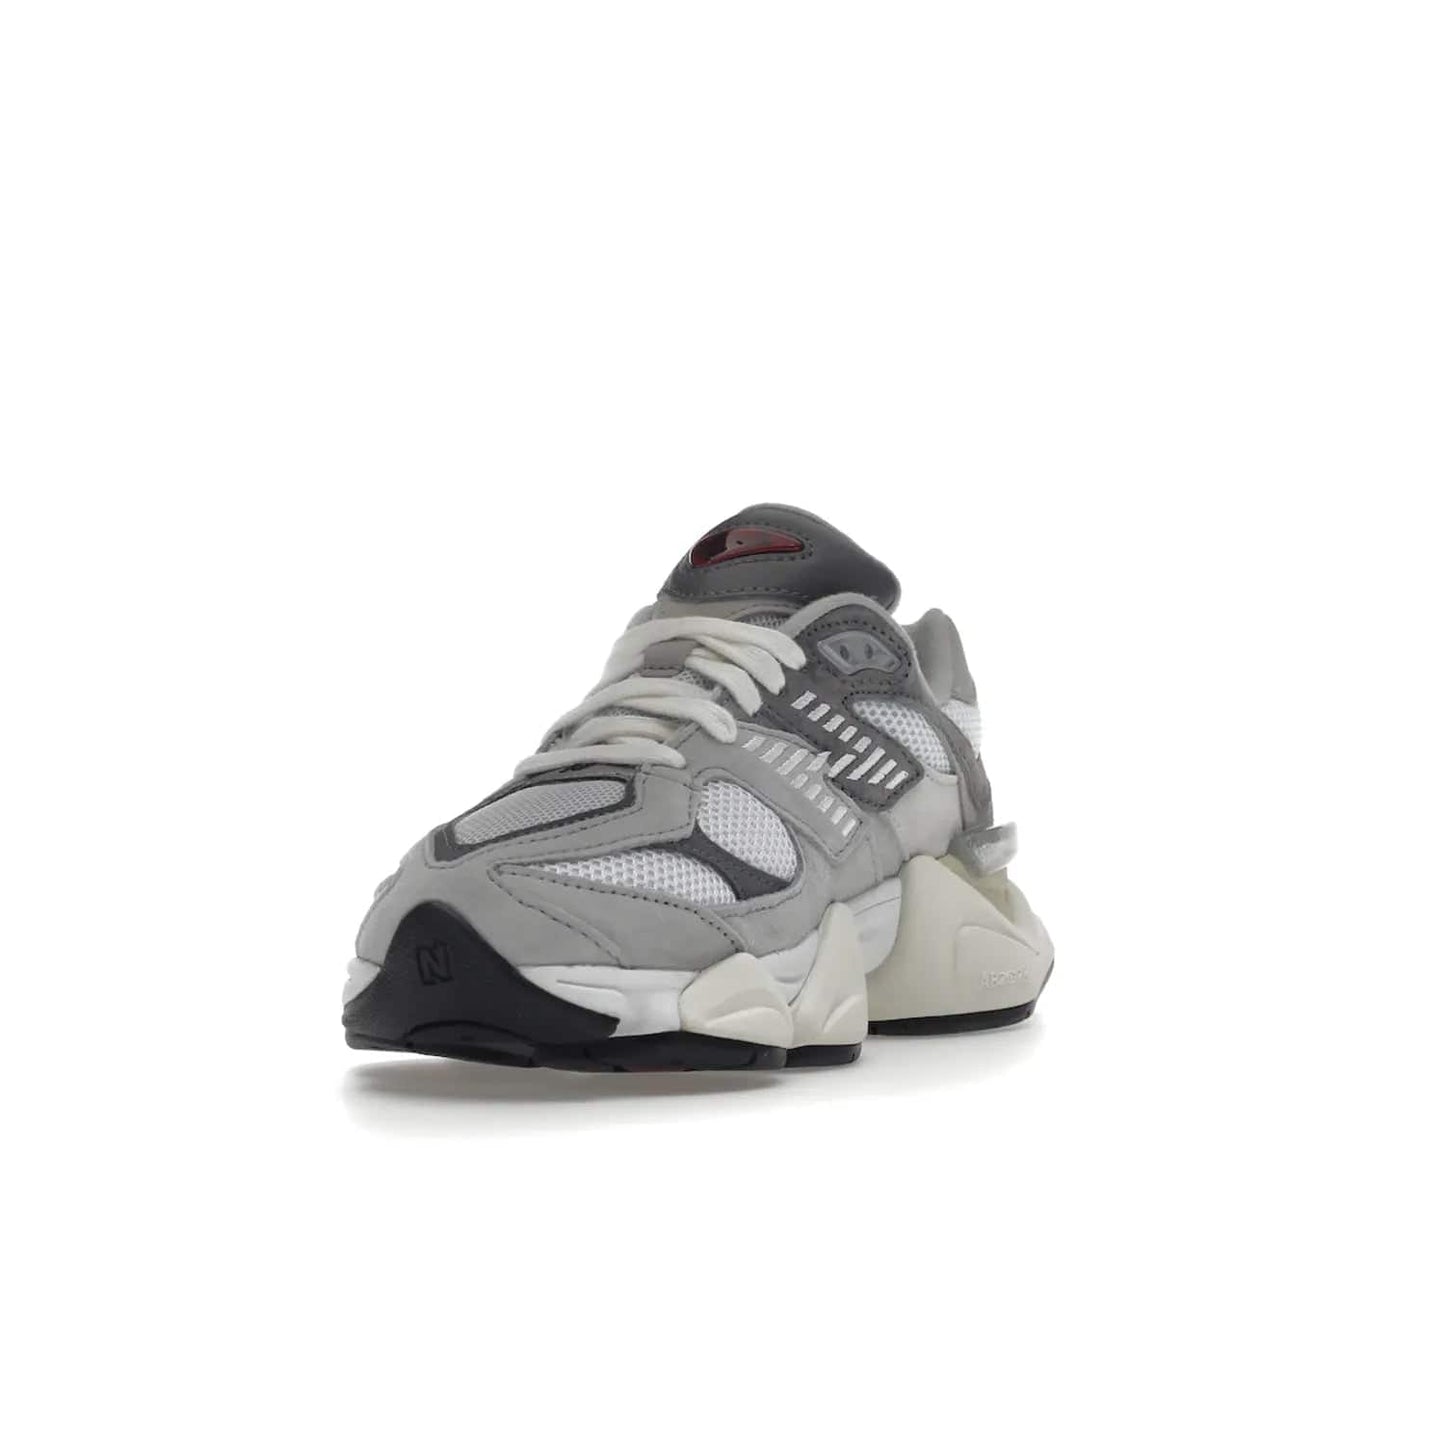 New Balance 9060 Rain Cloud Grey - Image 13 - Only at www.BallersClubKickz.com - New Balance 9060 Rain Cloud Grey is an early 2000s design with grey and off-white tones. Pigskin suede, mesh, and silver accents. "N" emblem and dual-density midsole on diamond outsole. ABZORB technology cushioning. September 2nd release for $150.